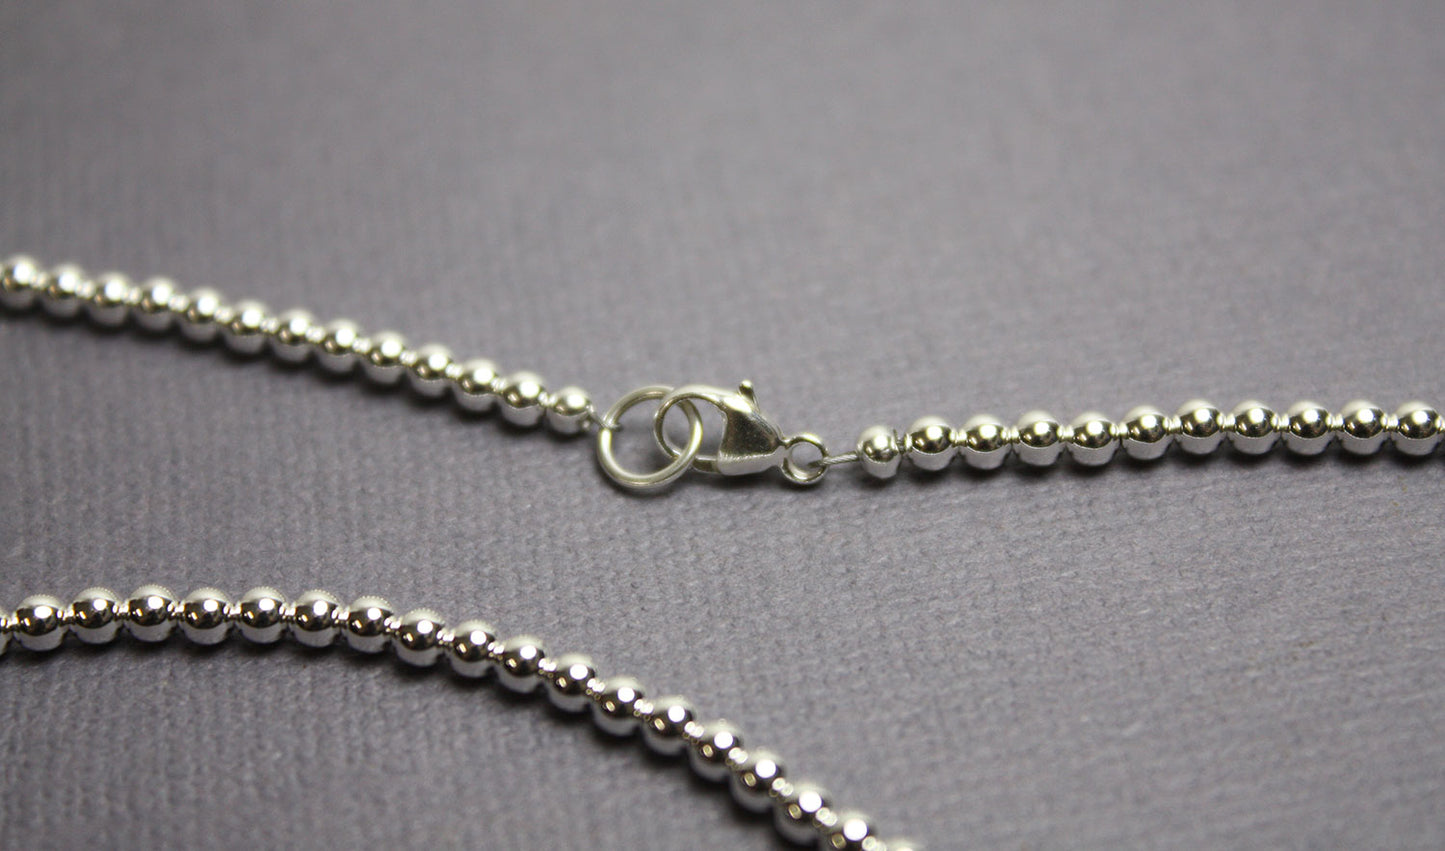 Sterling Silver 3mm Beads On Link Box Chain Necklace 16 Pendant Charm Ball  Beadsed: 16789893873715